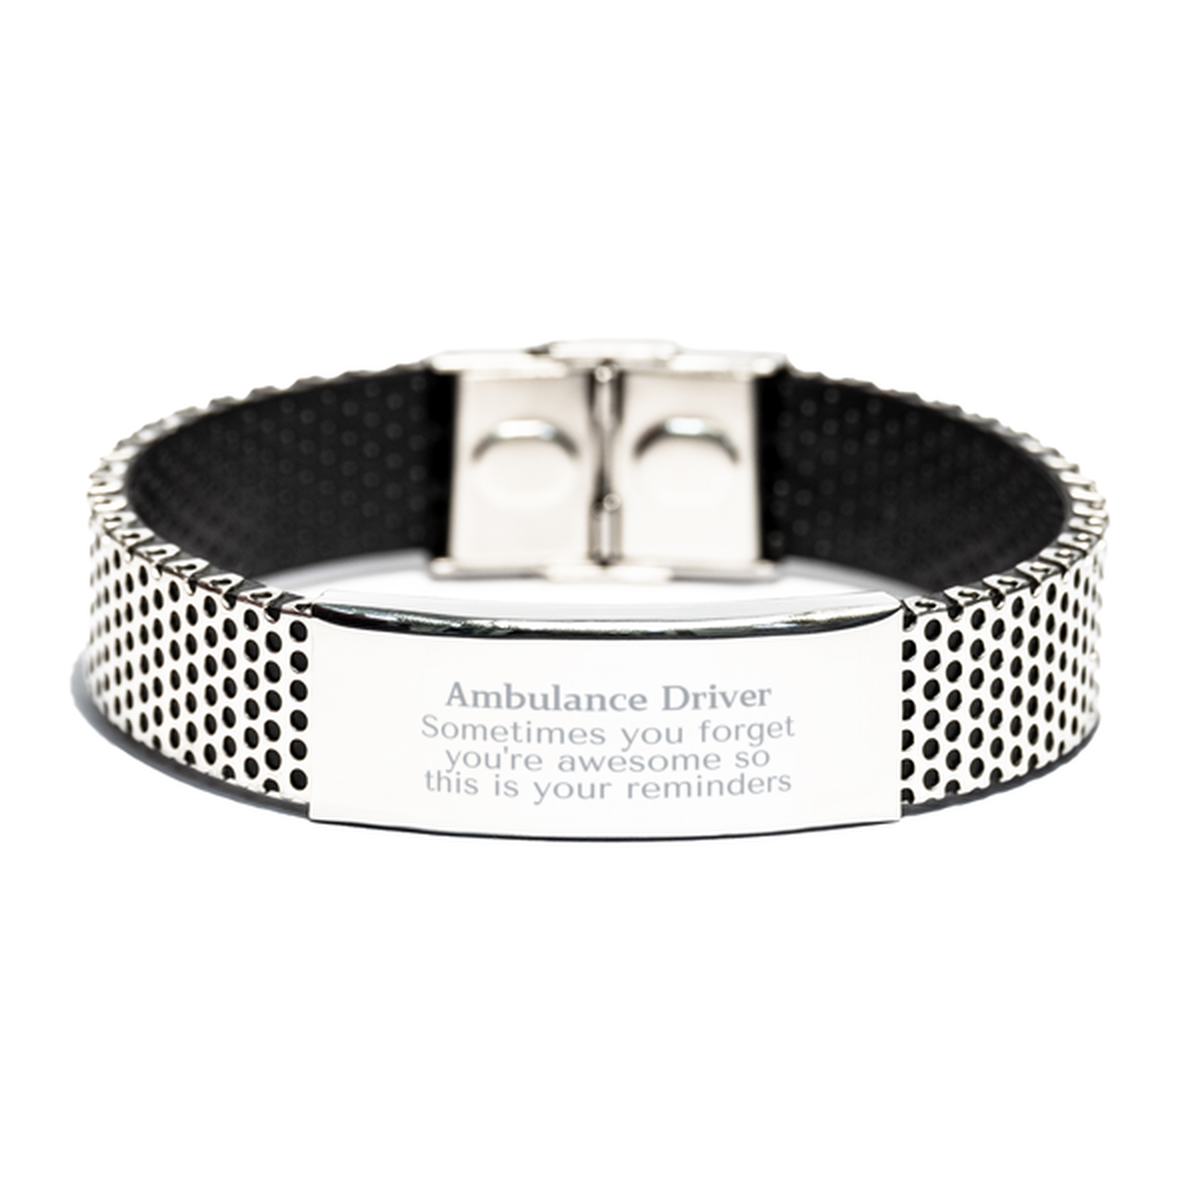 Sentimental Ambulance Driver Stainless Steel Bracelet, Ambulance Driver Sometimes you forget you're awesome so this is your reminders, Graduation Christmas Birthday Gifts for Ambulance Driver, Men, Women, Coworkers